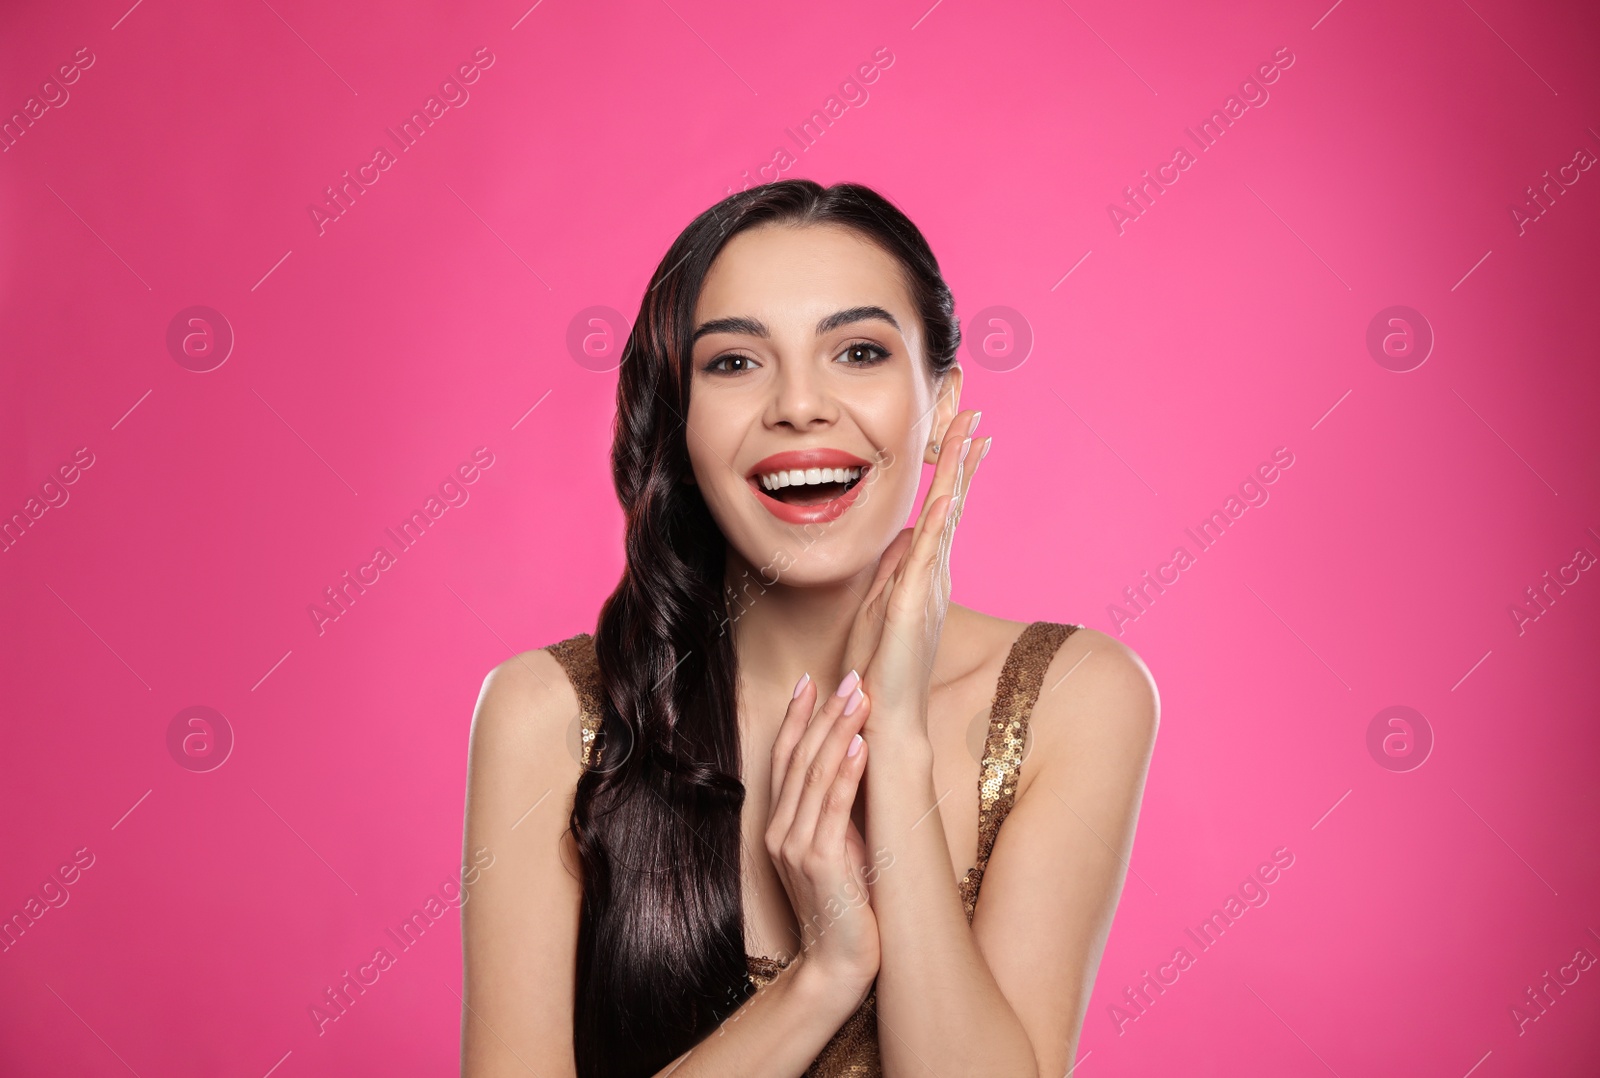 Photo of Portrait of surprised woman on pink background